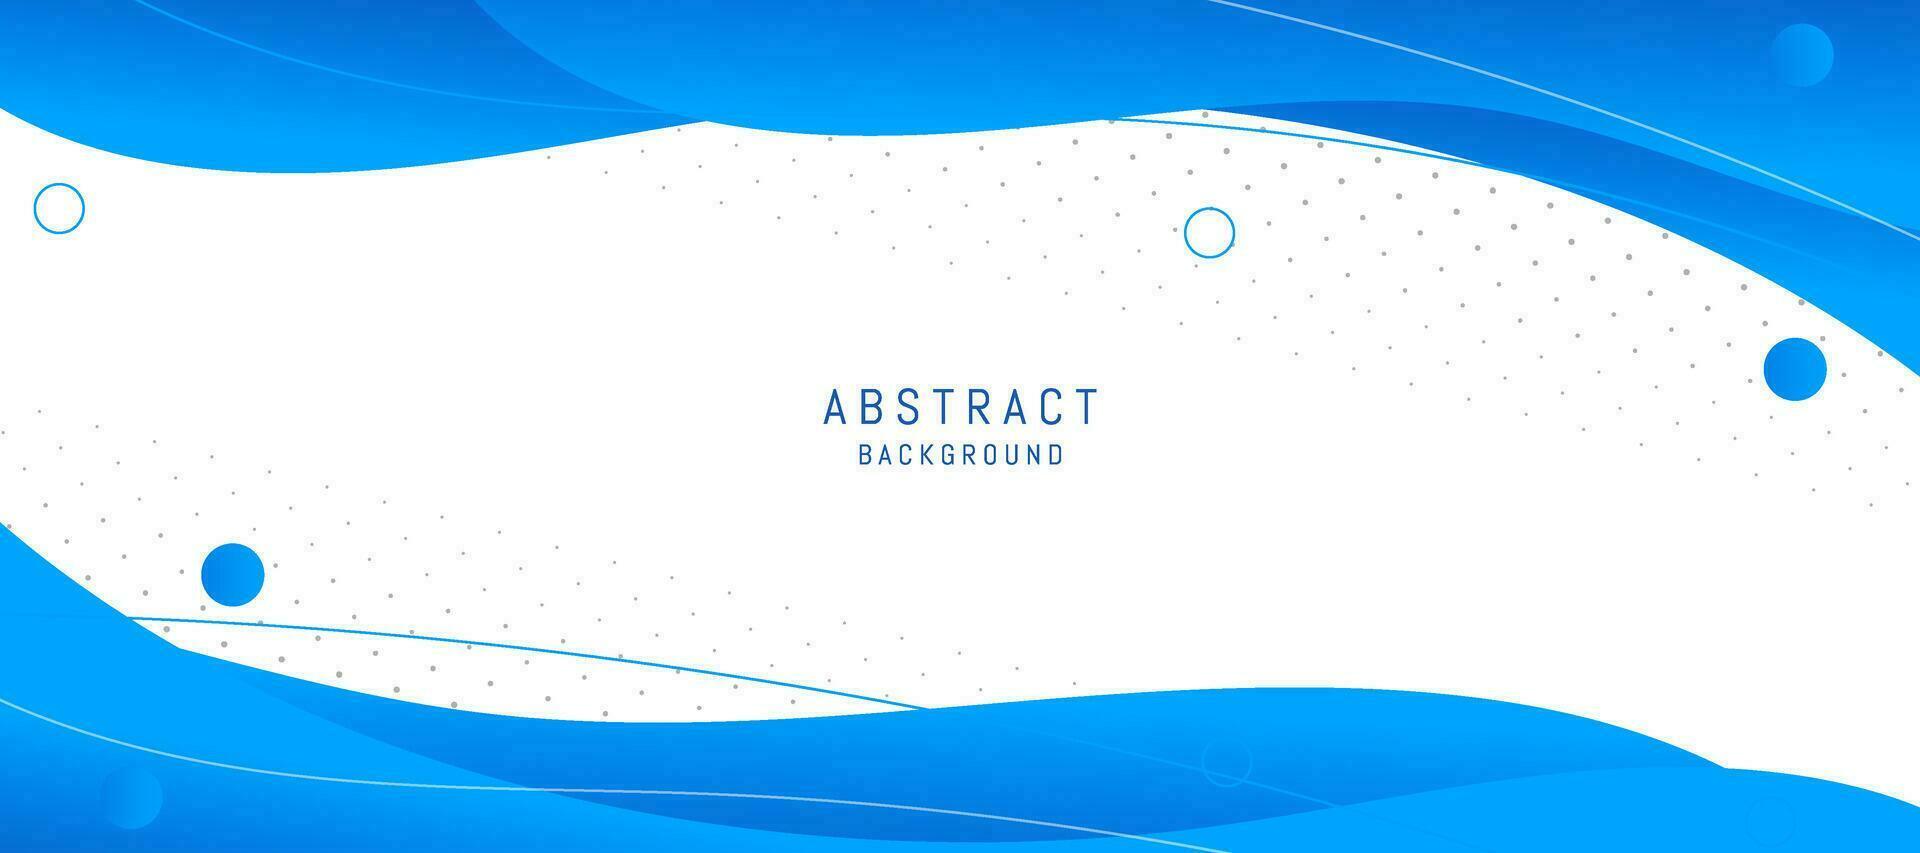 Abstract blue modern background. Colorful template banner with blue gradient color. Design with liquid shape. vector